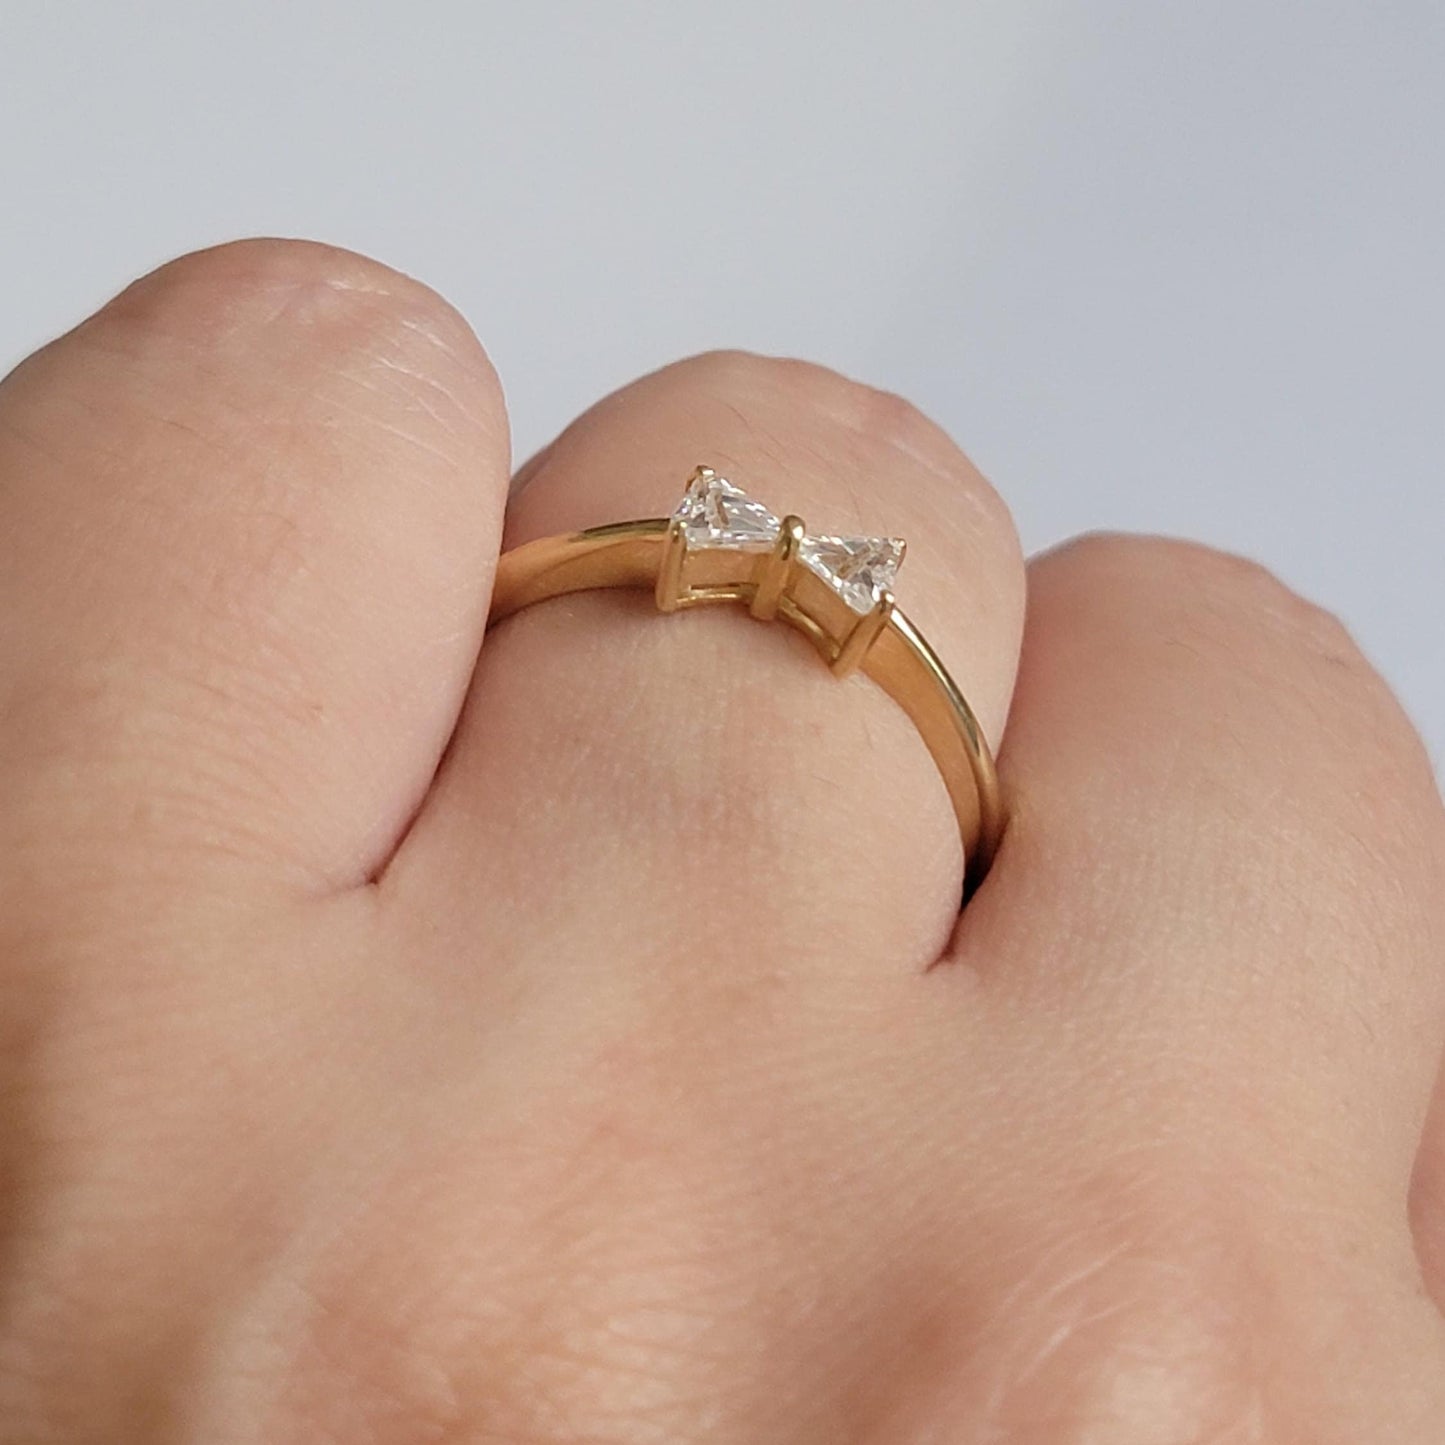 Diamond Ring, 14k Gold Ring, Trillion Natural Diamond Ring, Dainty Ring, Unique Engagement Ring, Promise Ring for Her